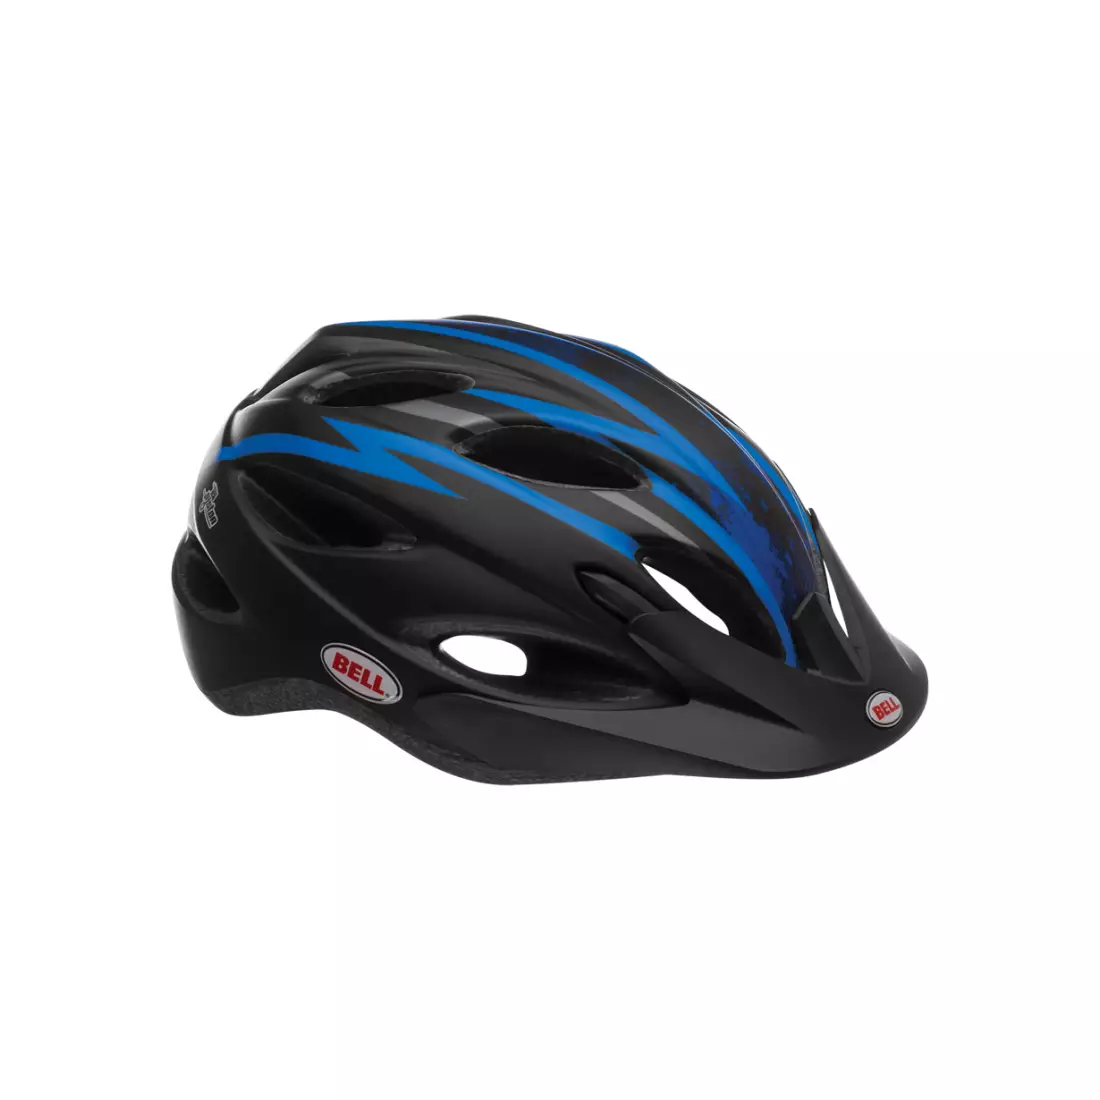 BELL PISTON bicycle helmet, black and blue